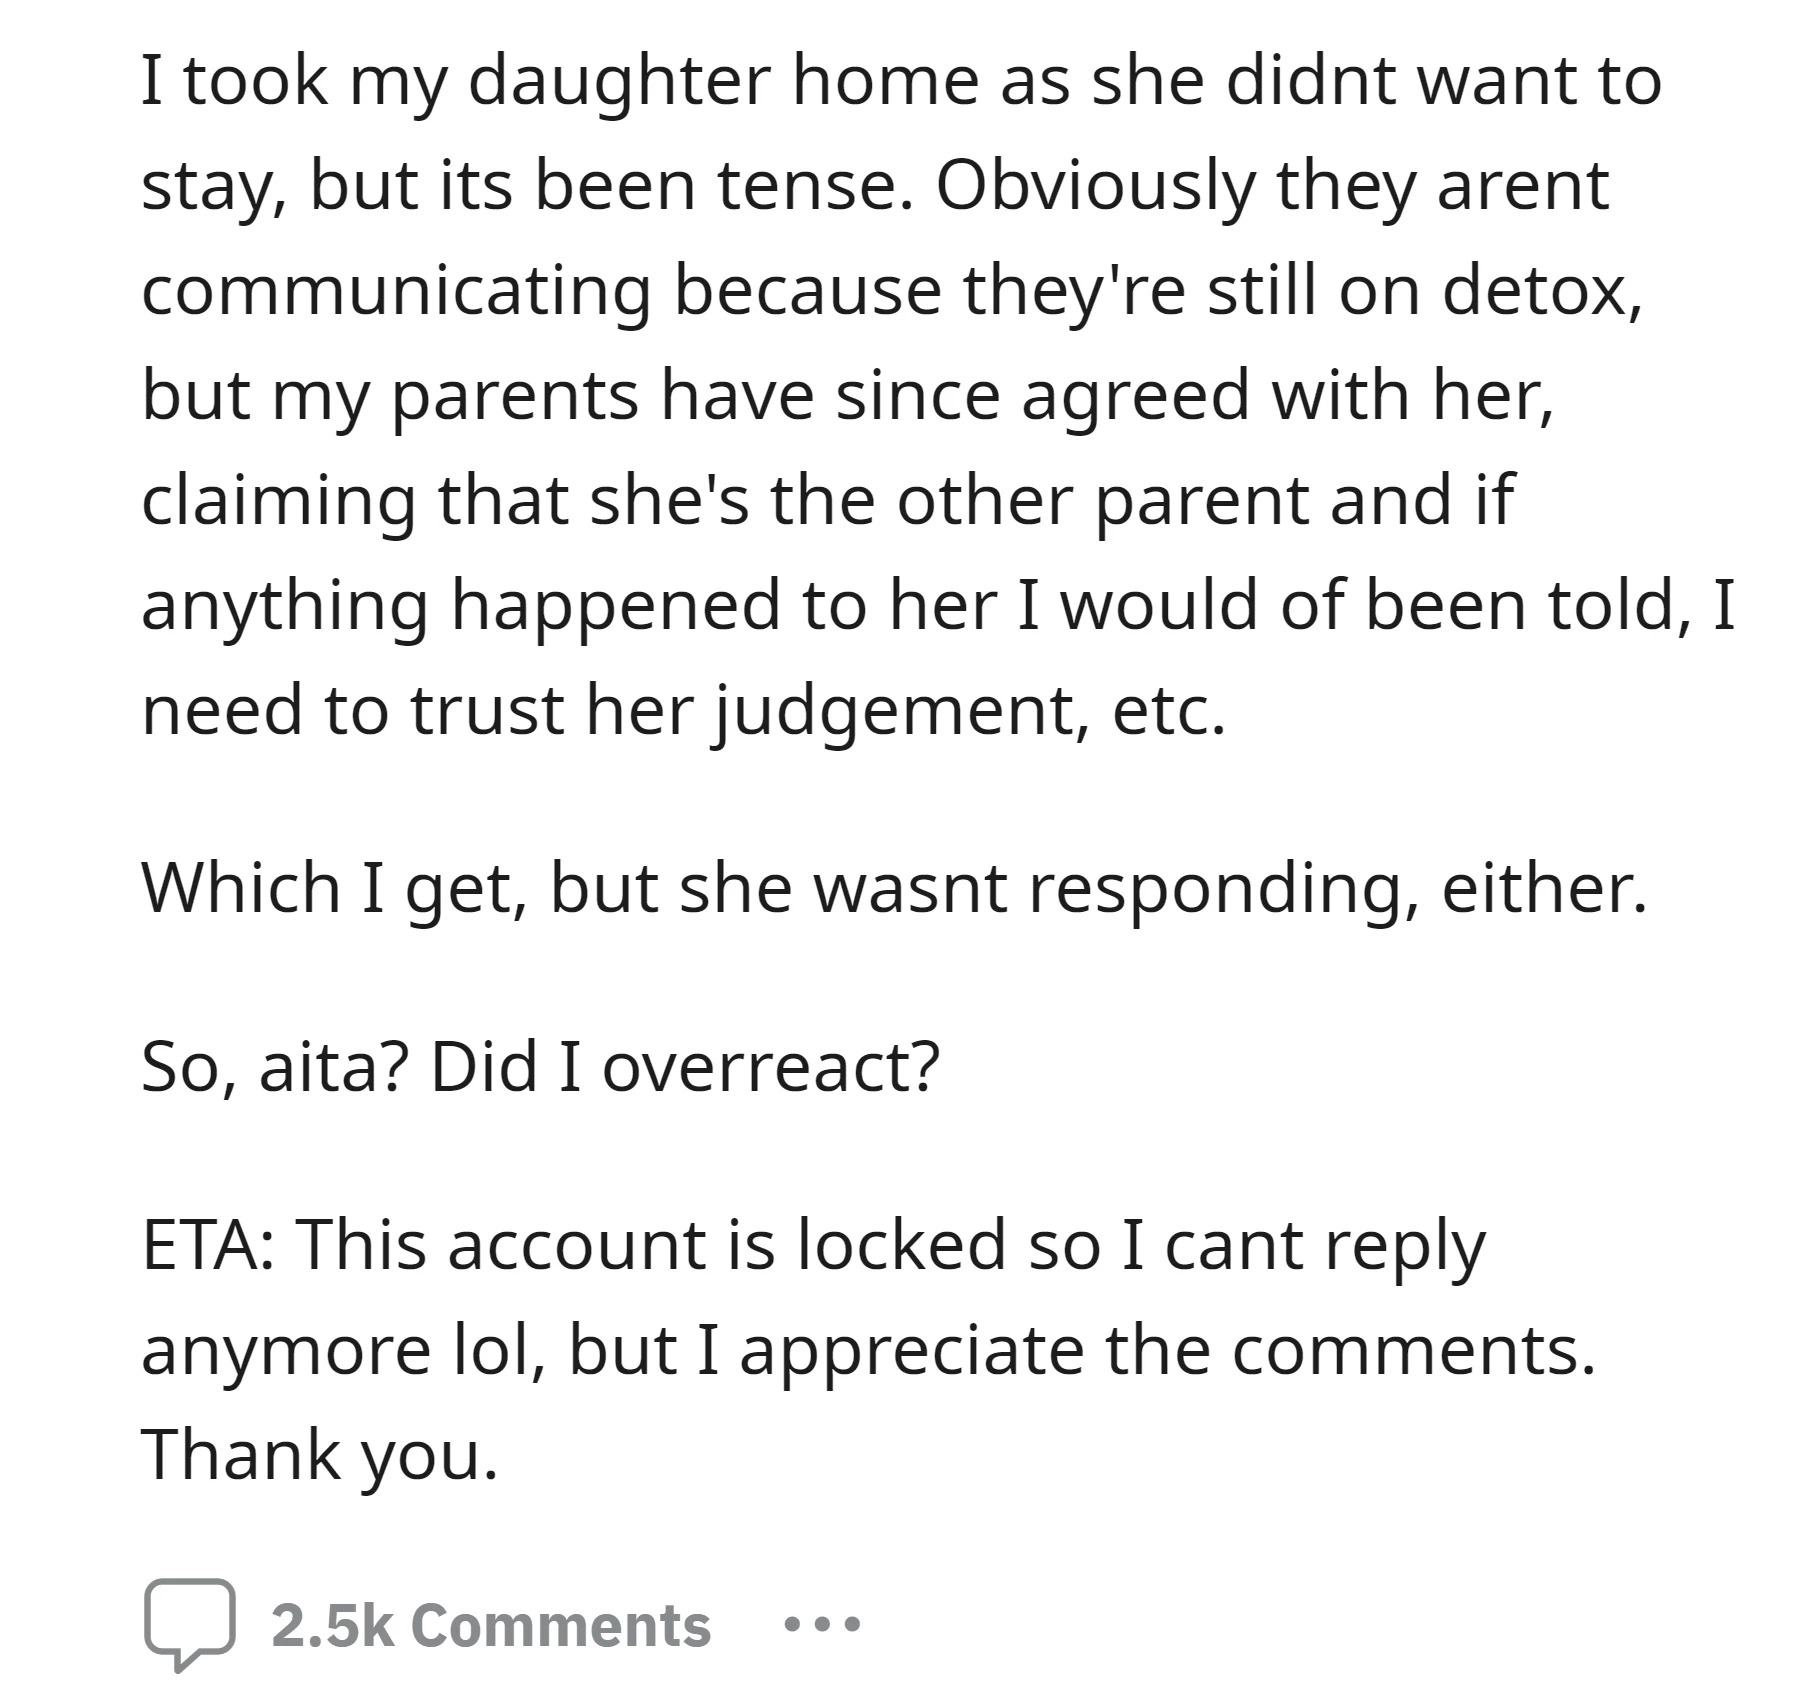 OP's parents sided with the mom, suggesting he should trust his ex's judgment